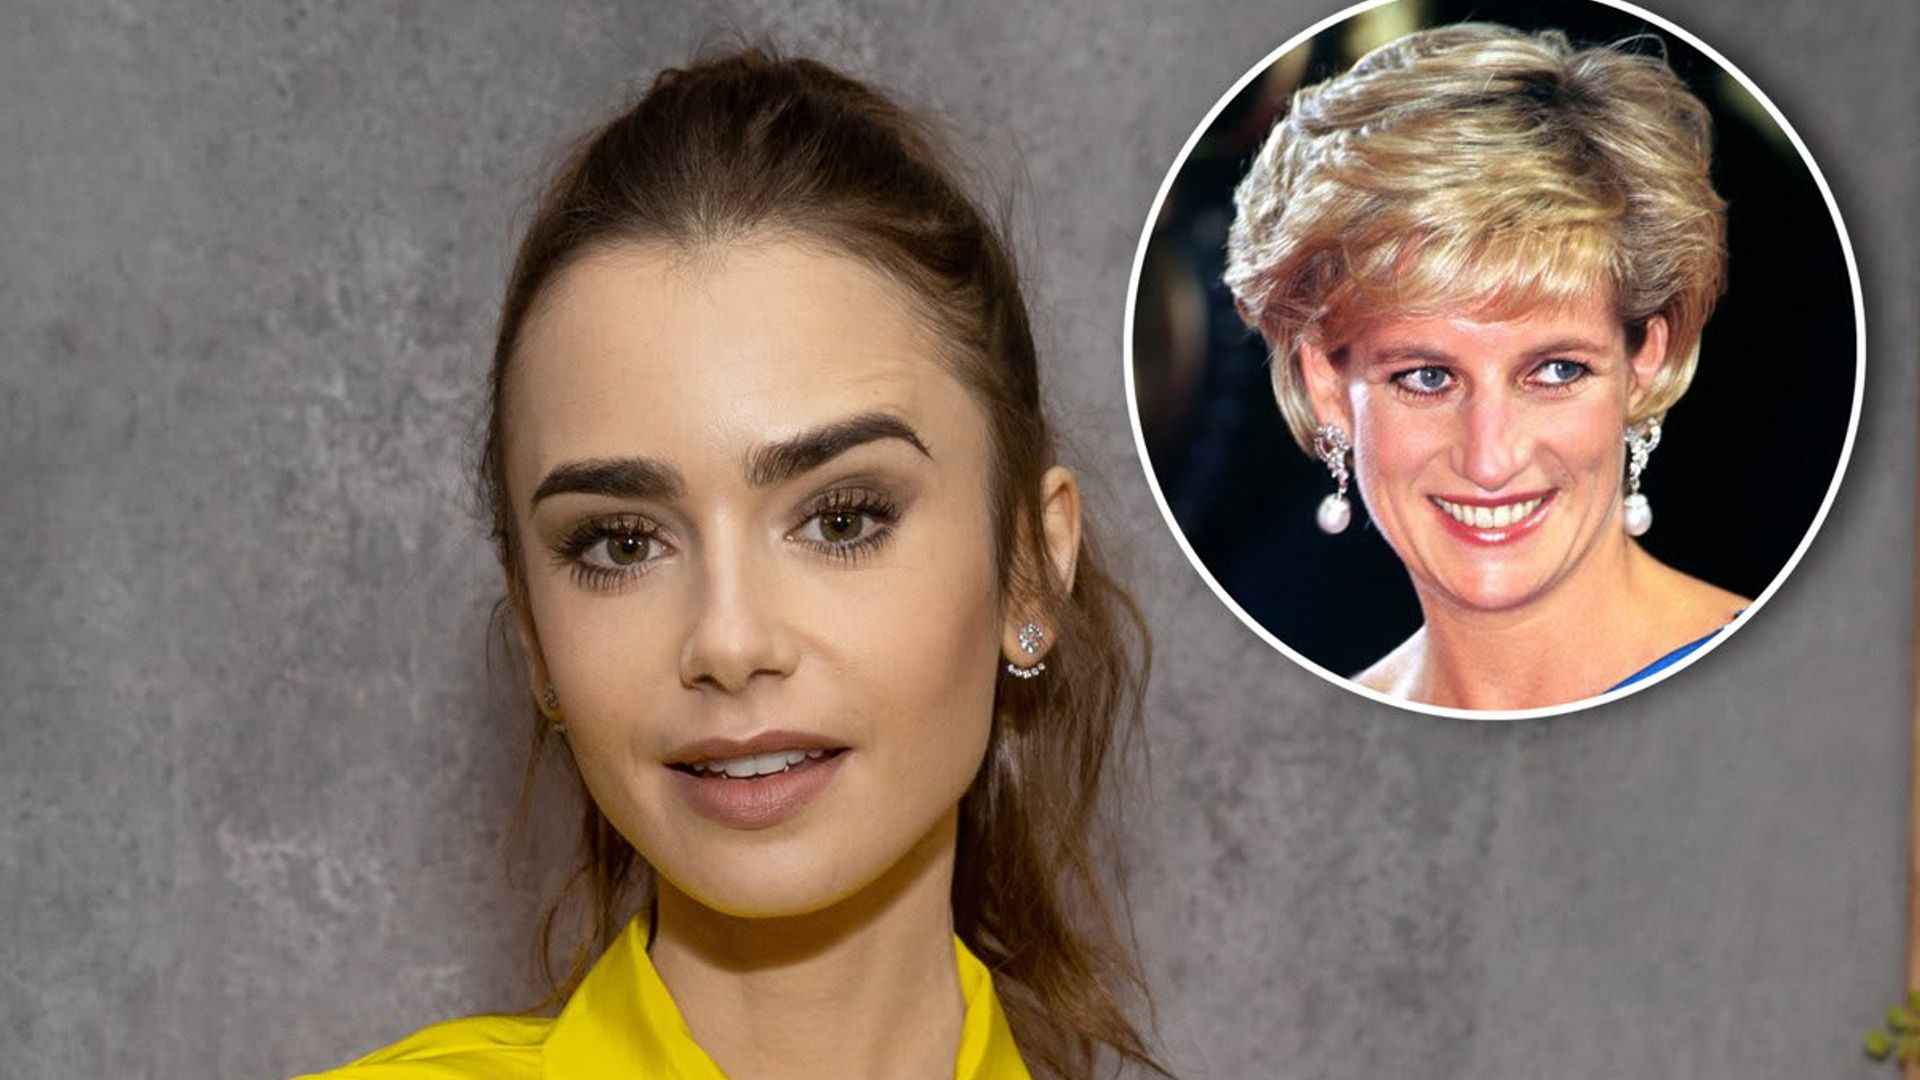 Emily in Paris' Lily Collins reveals she 'tried to pull' flowers back from Princess Diana as a child